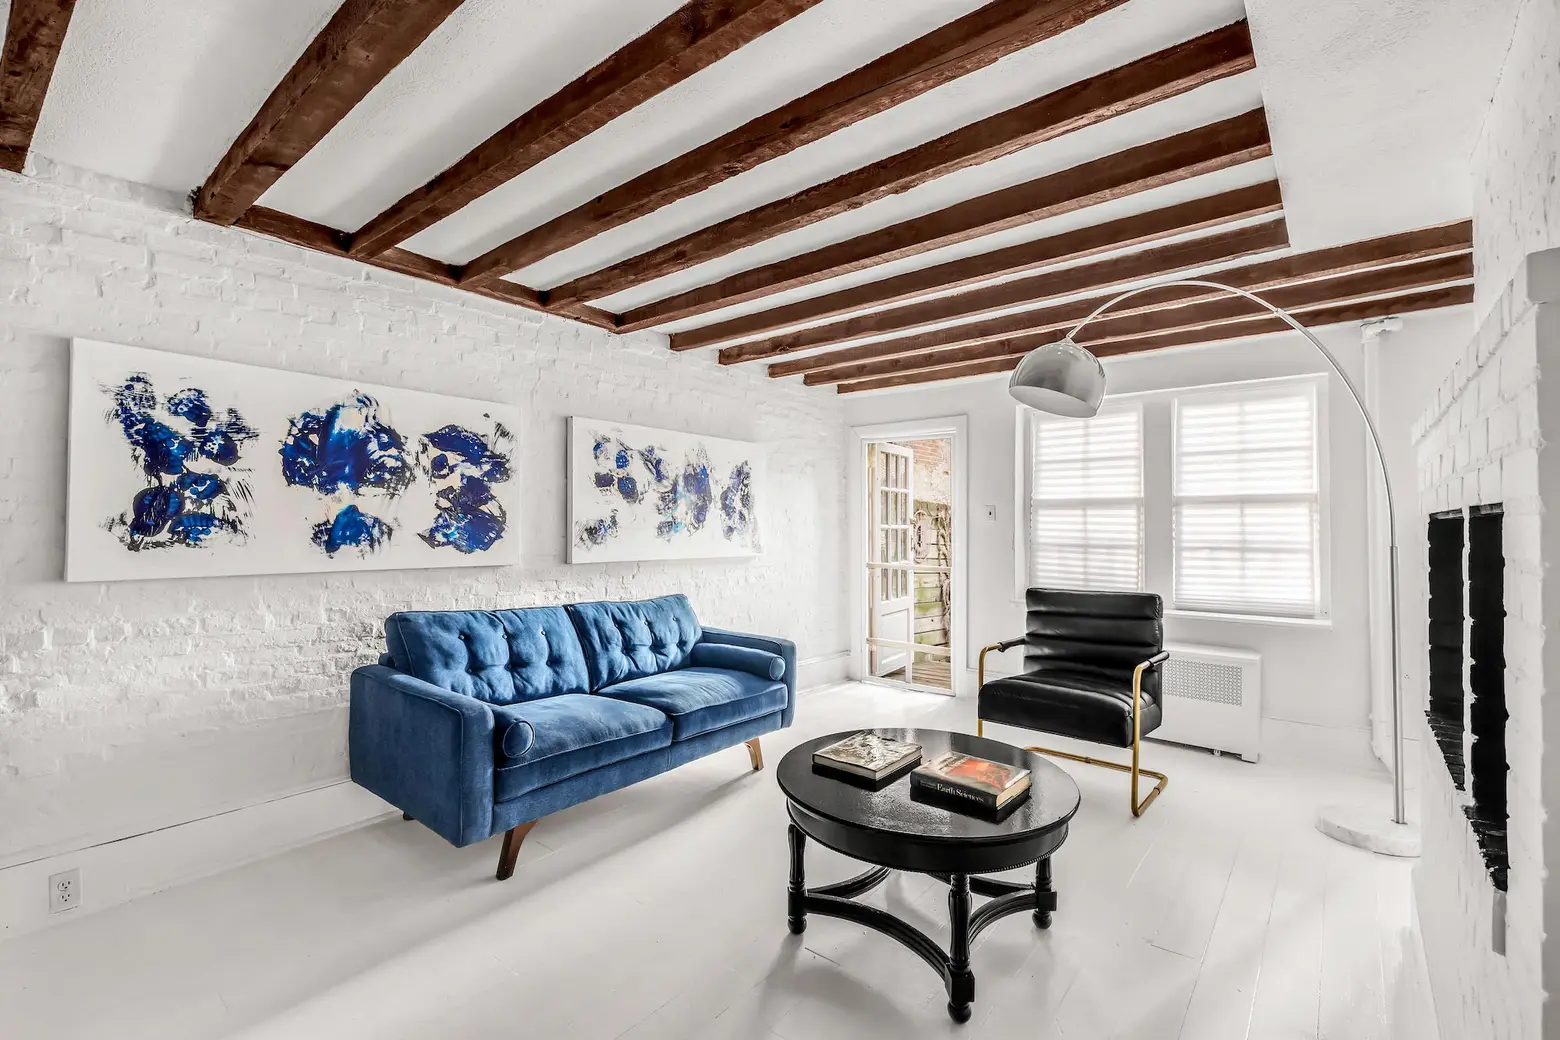 Skinny Upper East Side townhouse with literary ties asks $4M